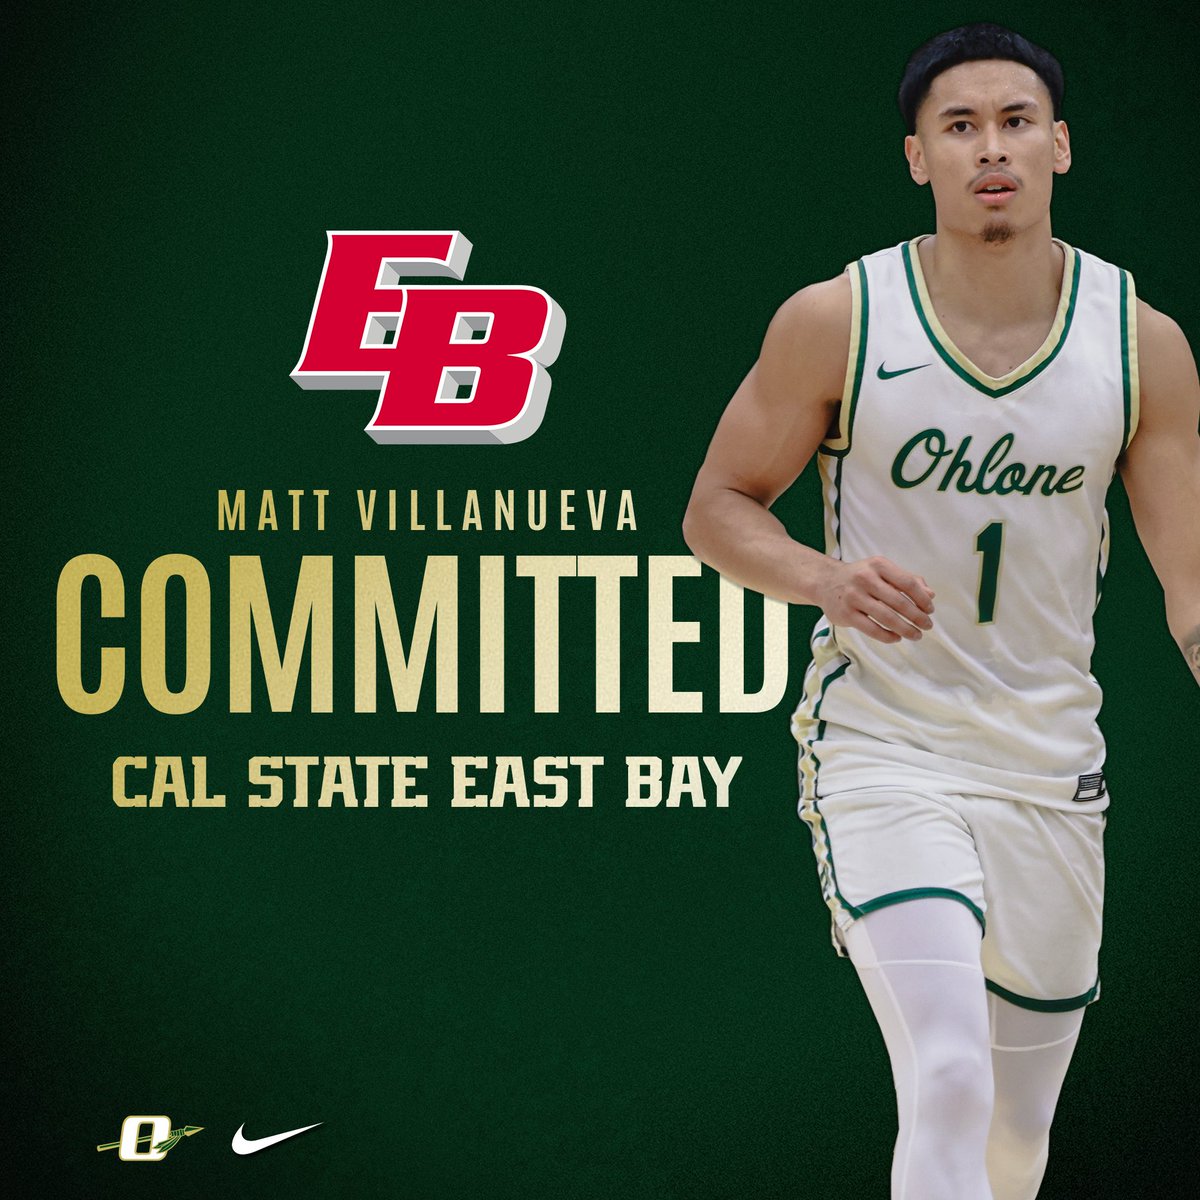 Ohlone College Men’s Basketball Sophomore Matt Villanueva has committed to Cal State East Bay to continue his athletic and academic career. Villanueva joins the Pioneers under award winning head coach Bryan Rooney to compete in NCAA Division II CCAA competition.